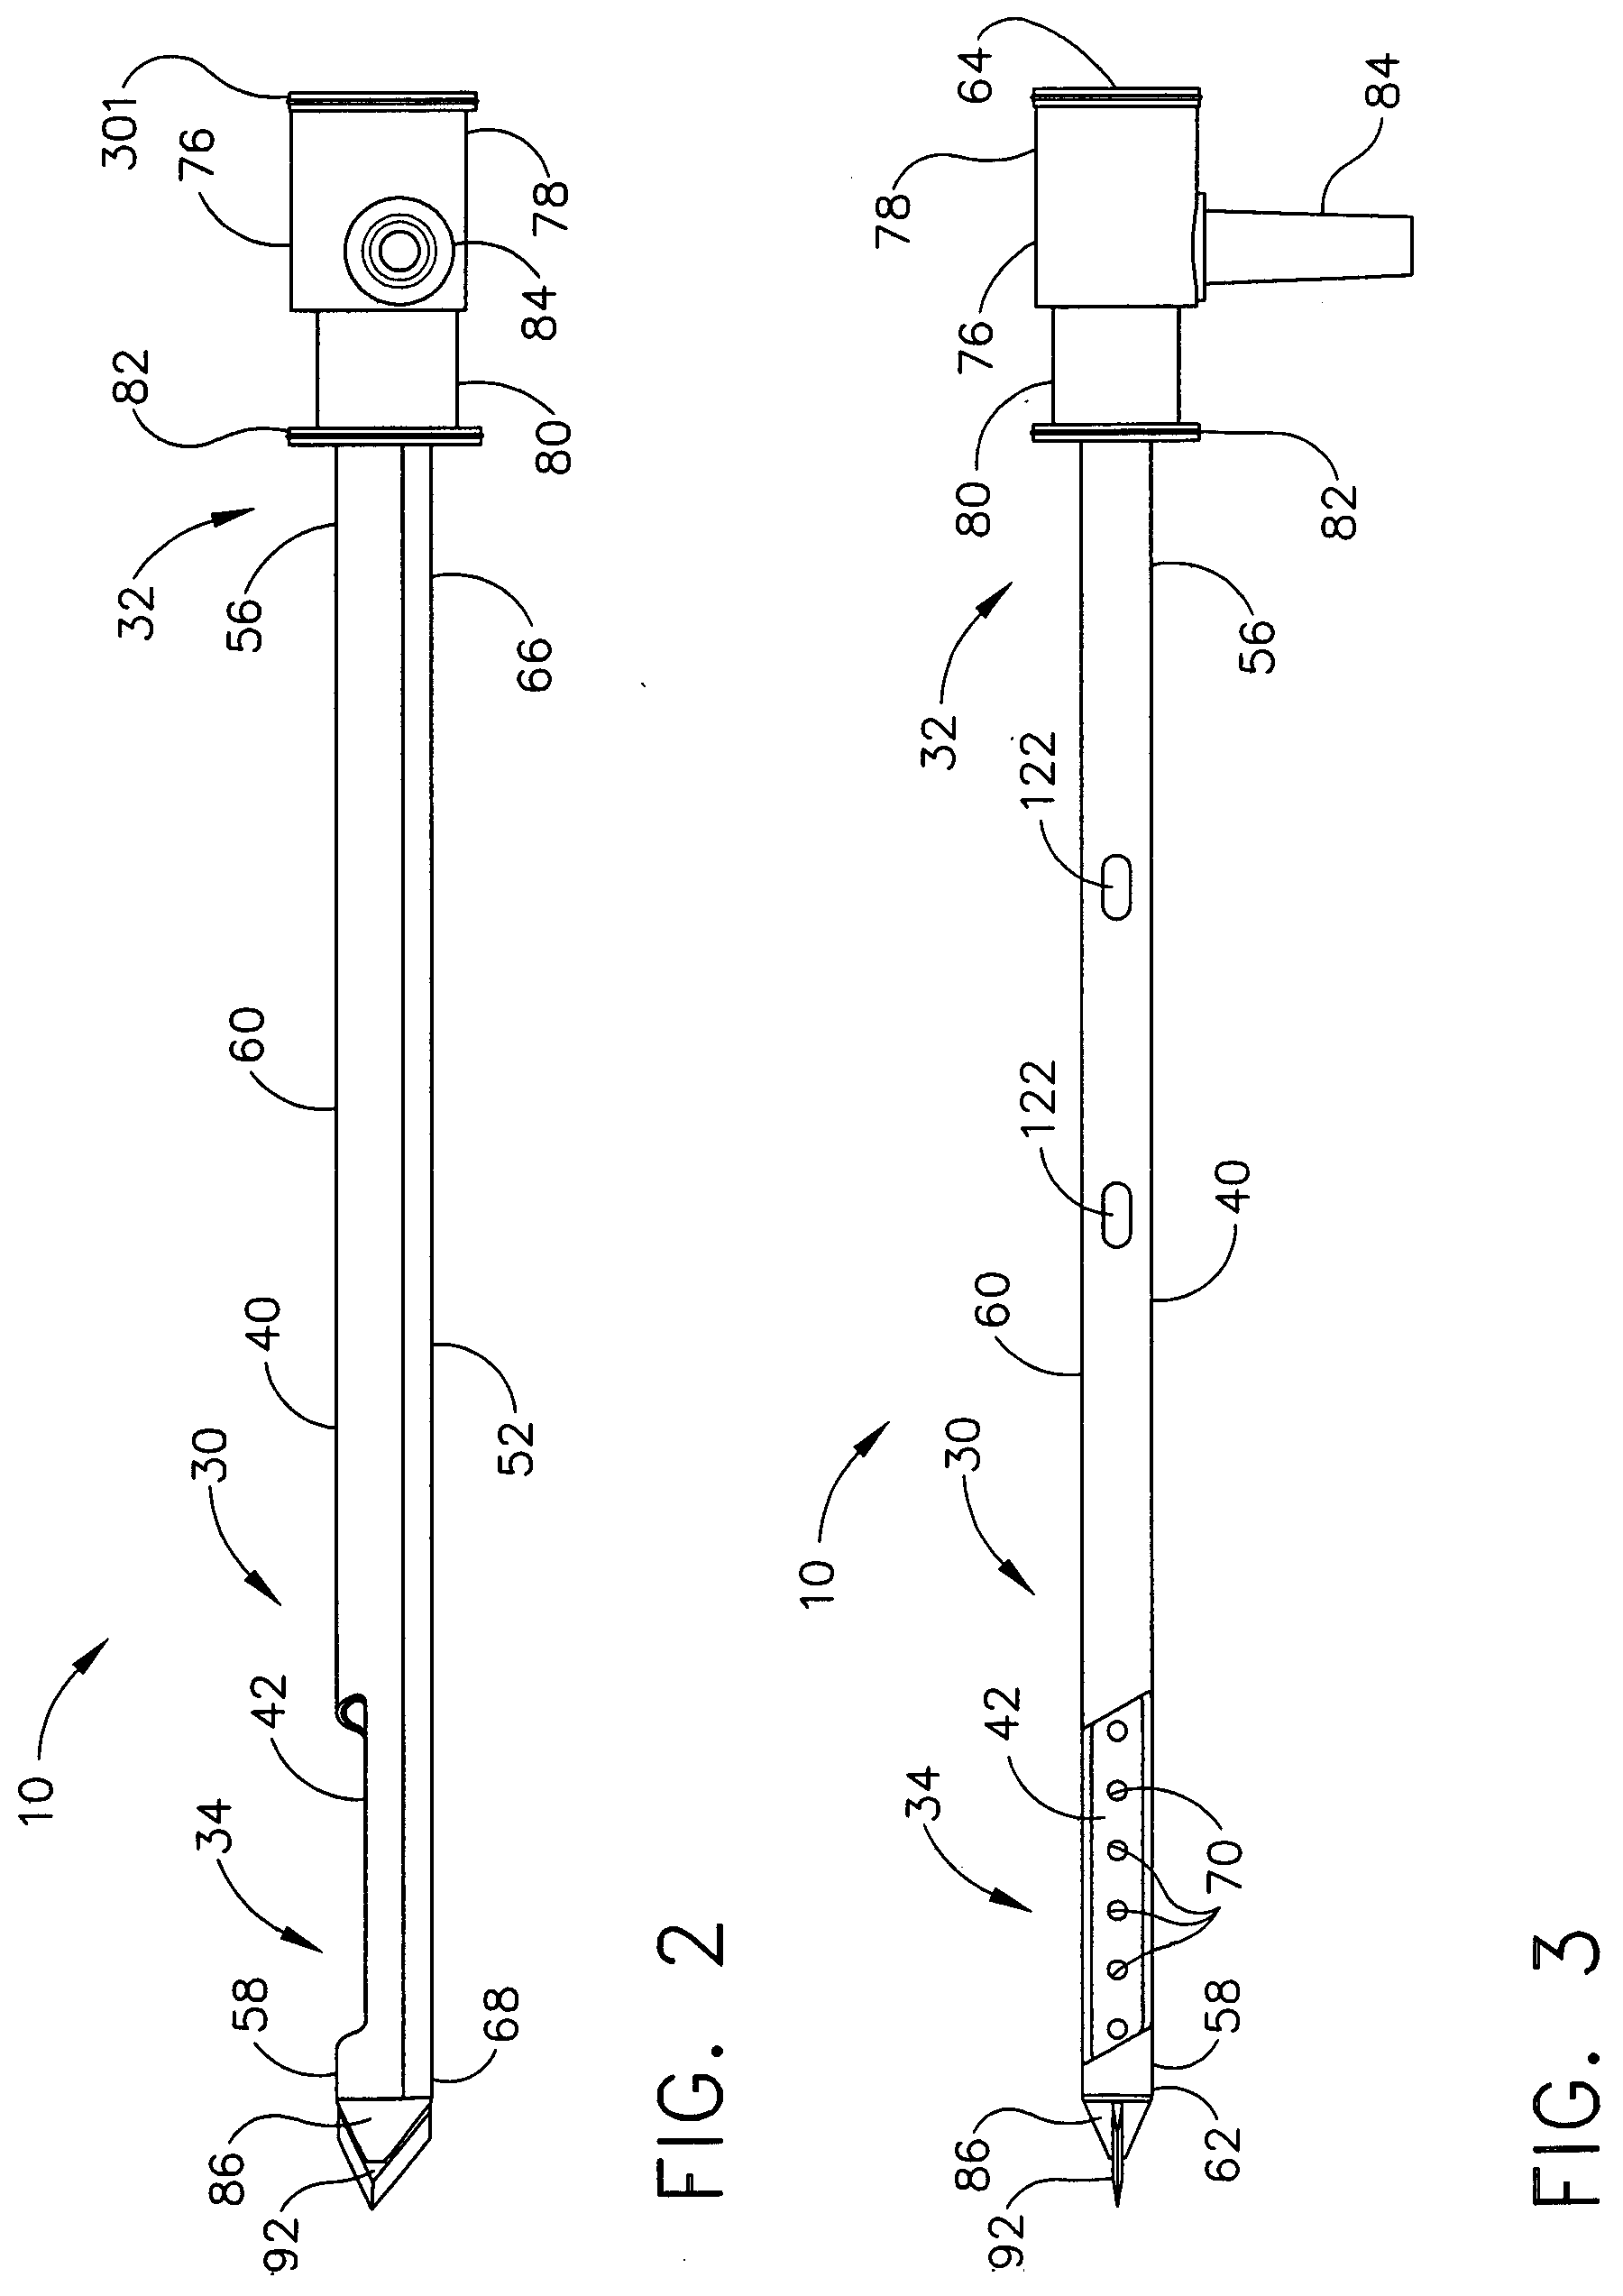 Method of manufacturing a needle assembly for use with a biopsy device